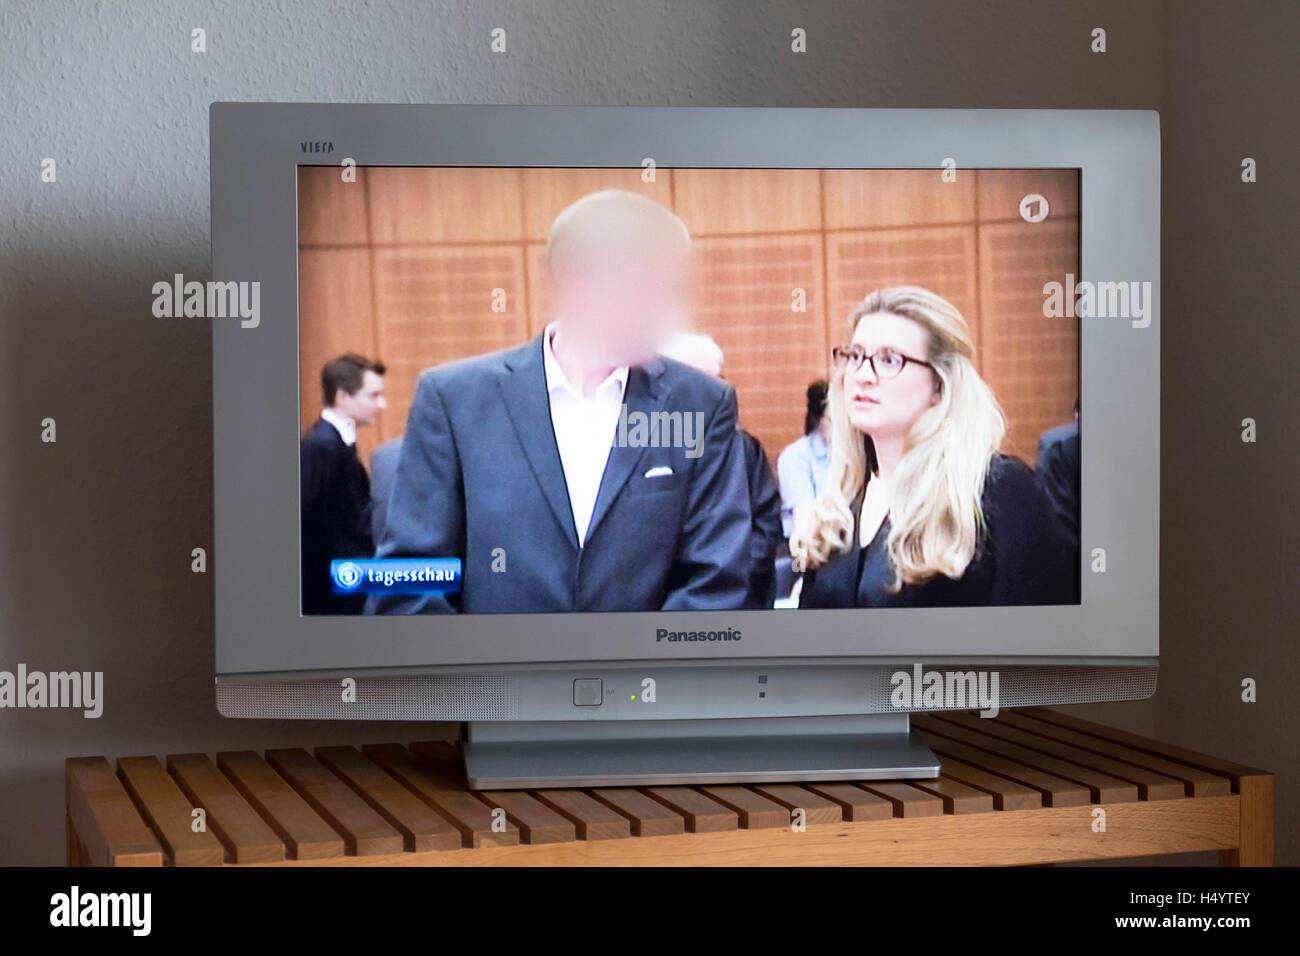 Tagesschau (German daily news show) showing the inside of a German court with face of defendant blurred out Stock Photo